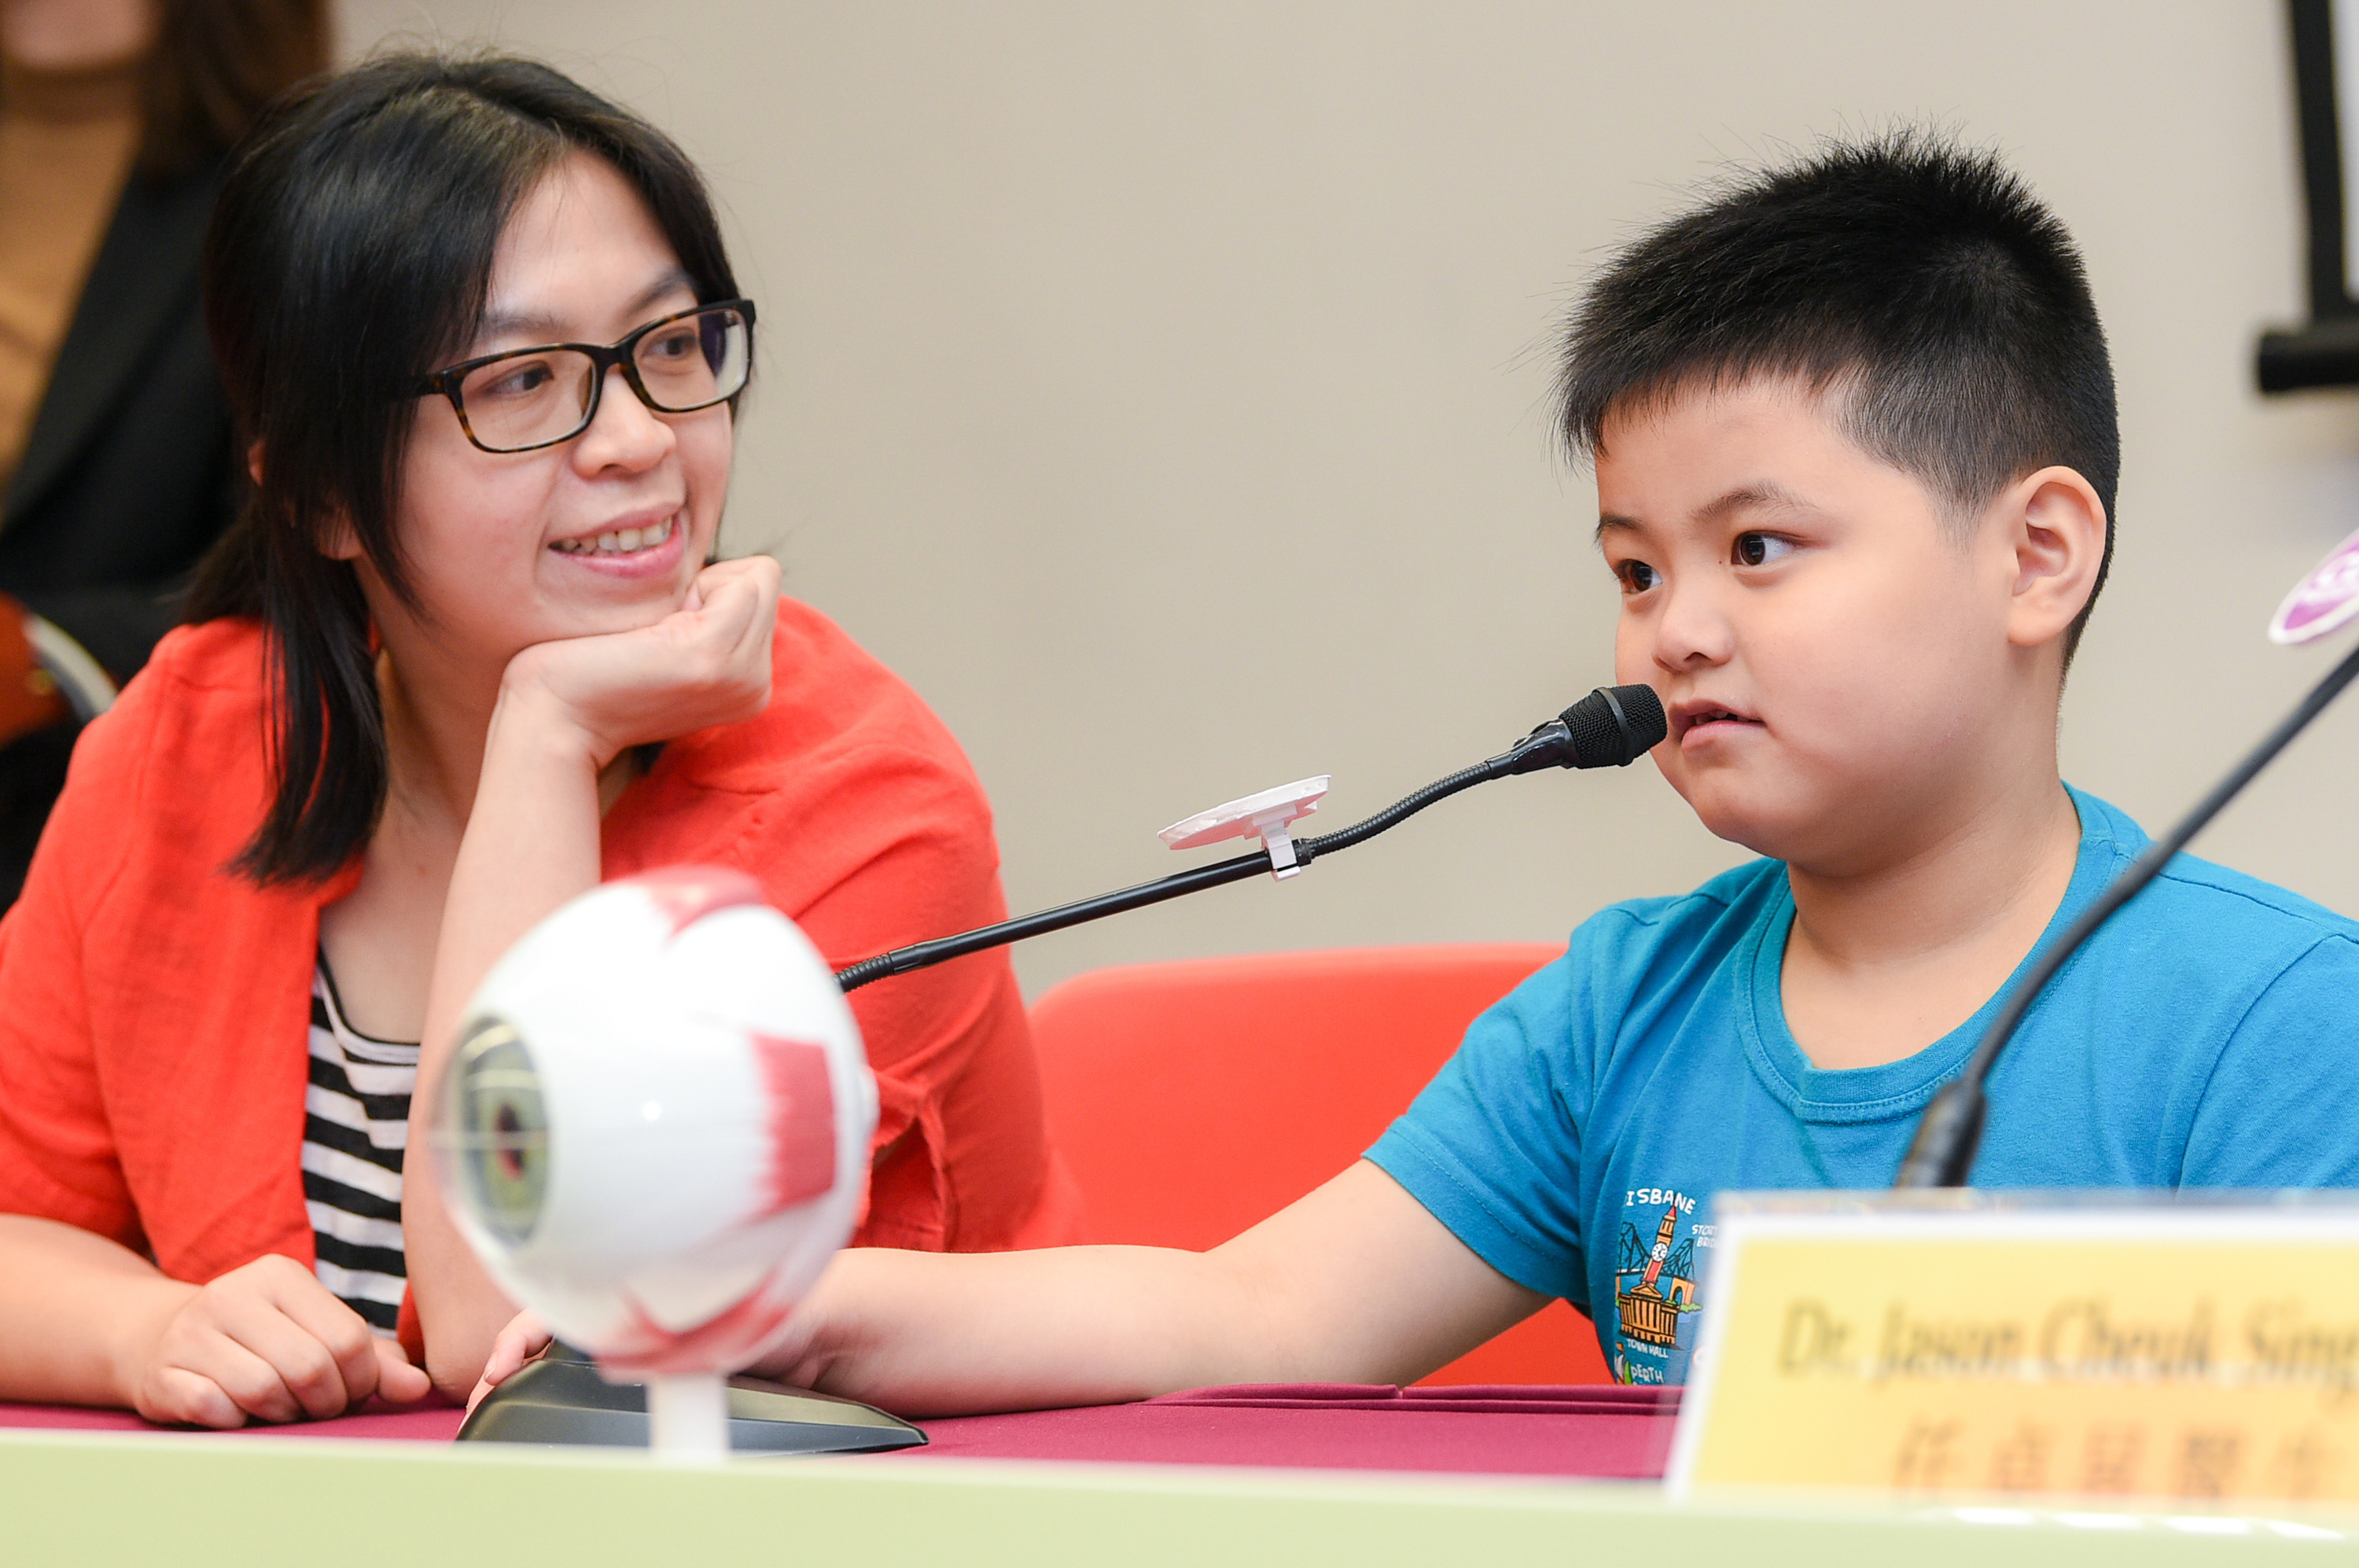 Gerrick (right) spends three to four hours watching TV or using smartphones every day. His mother Mrs. Tsang says in order to help his son prevent from myopia progression, she got him to join the LAMP study and will limit the time he spend on electronic devices in the future. 